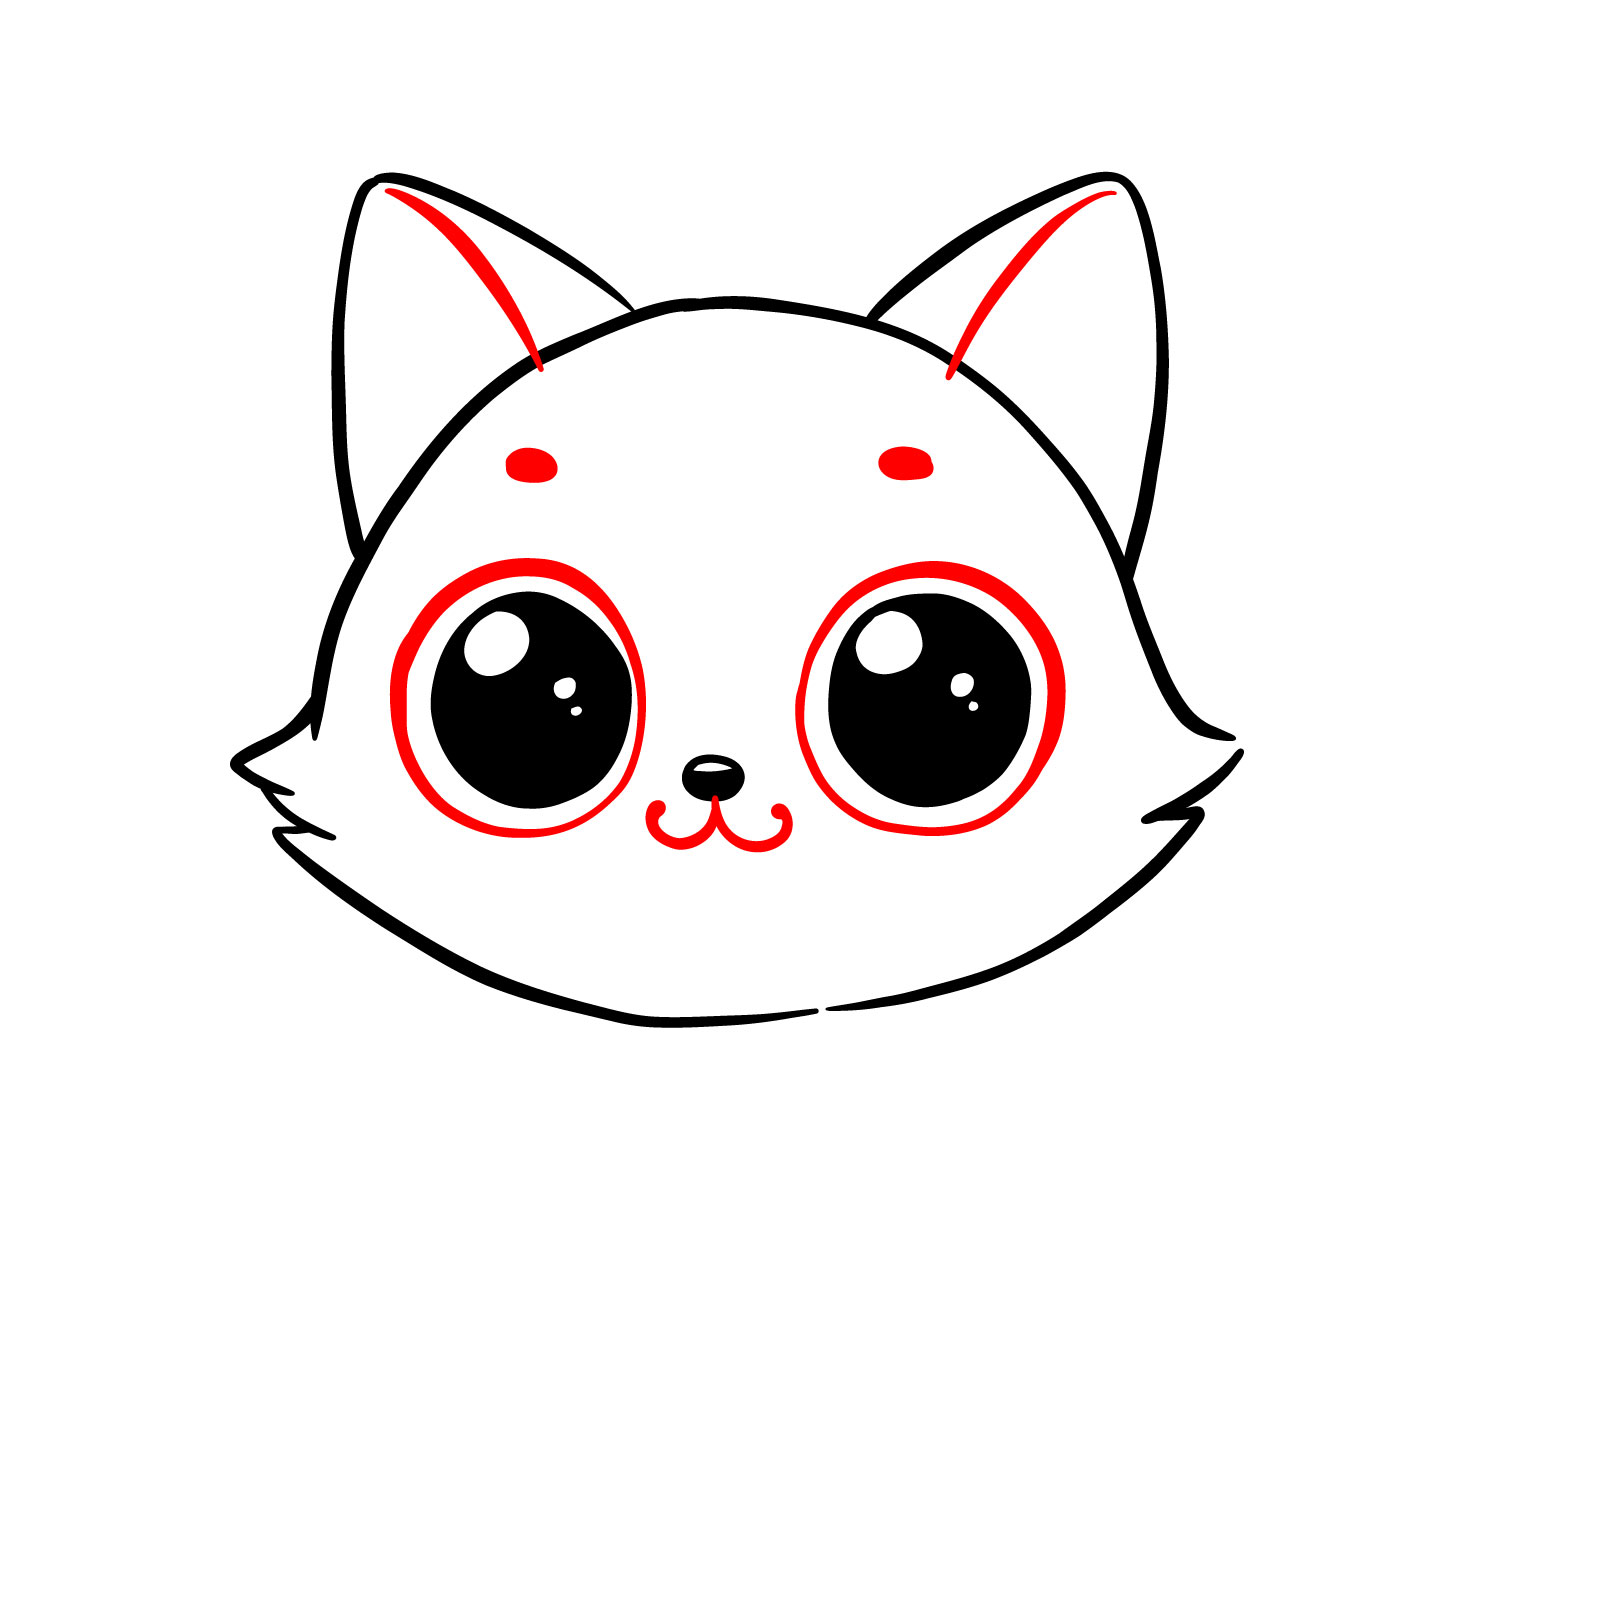 Detailing the kitten's face with eyes, mouth, and ear shapes - step 05